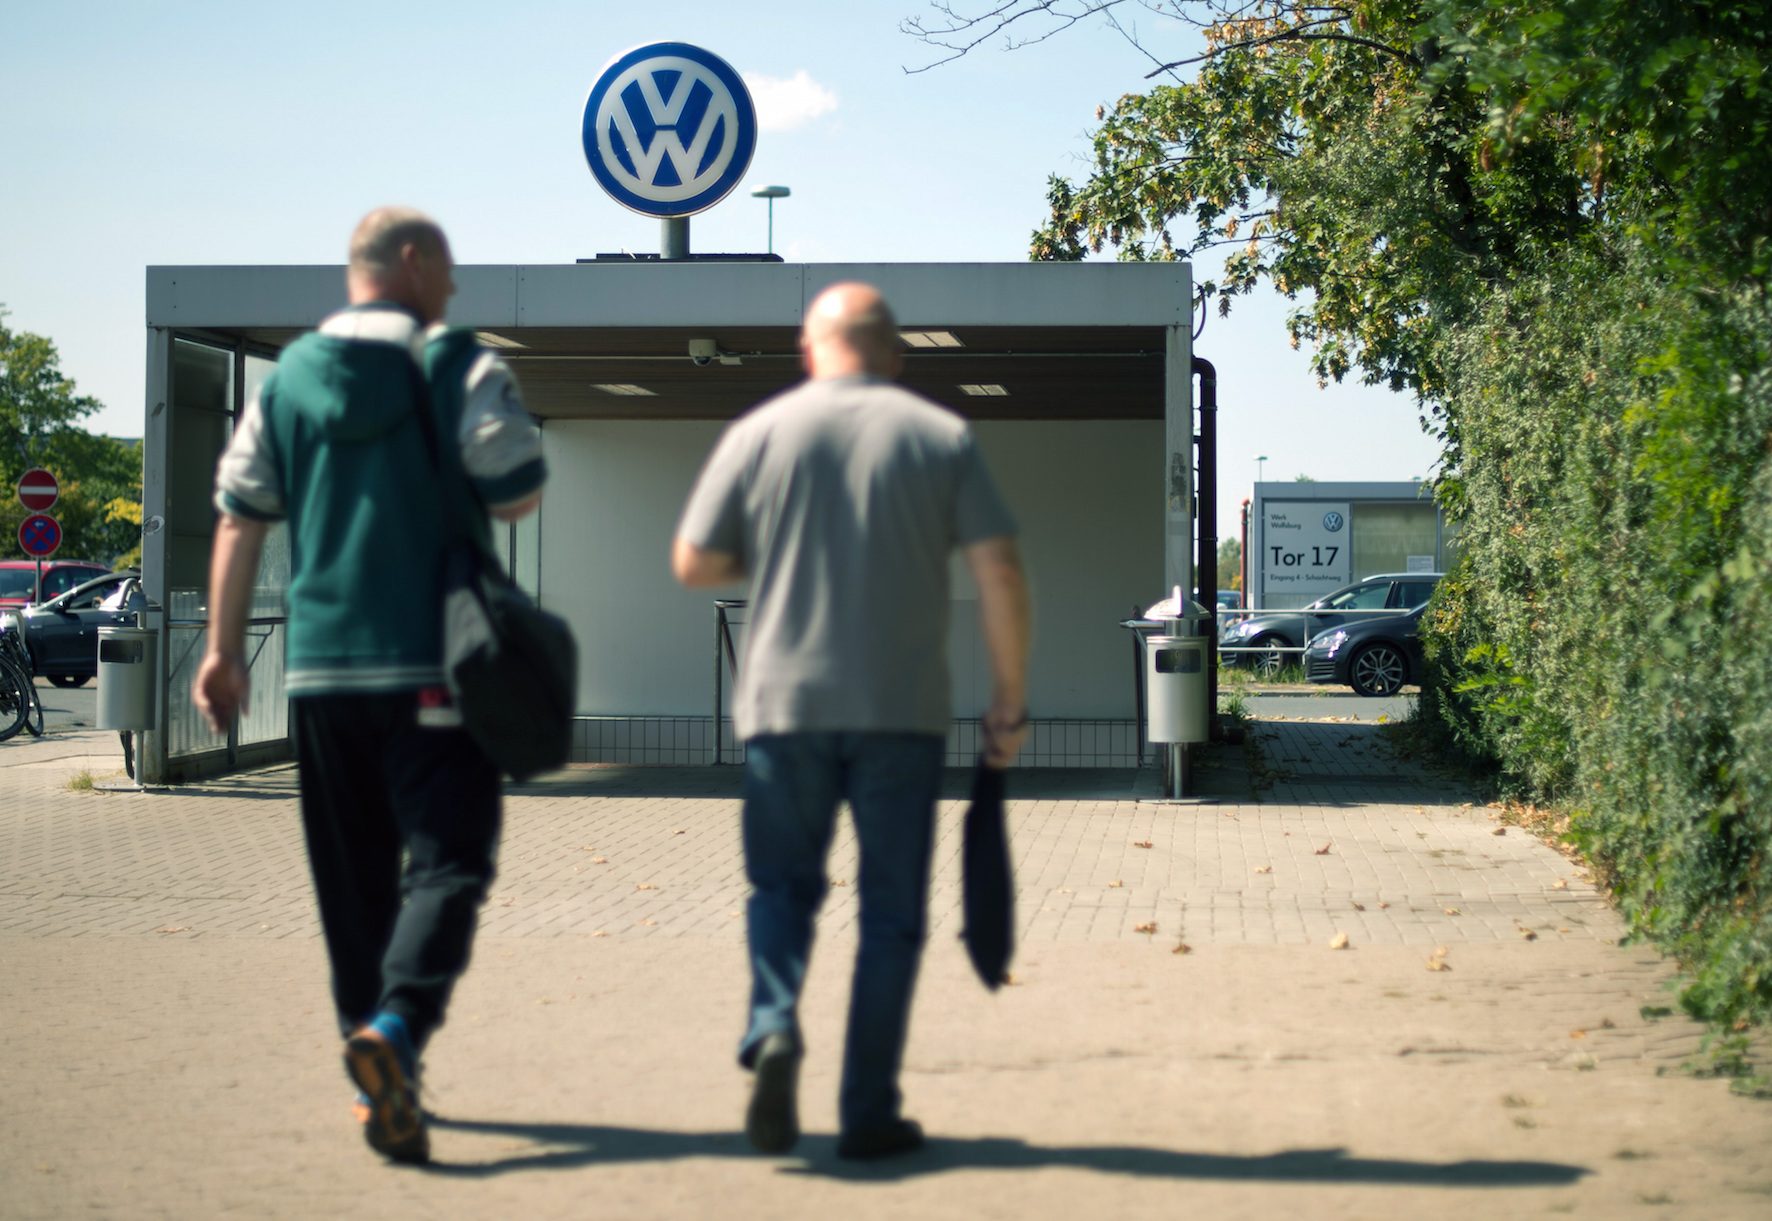 Volkswagen cuts nearly 28,000 workers’ hours over supply woes